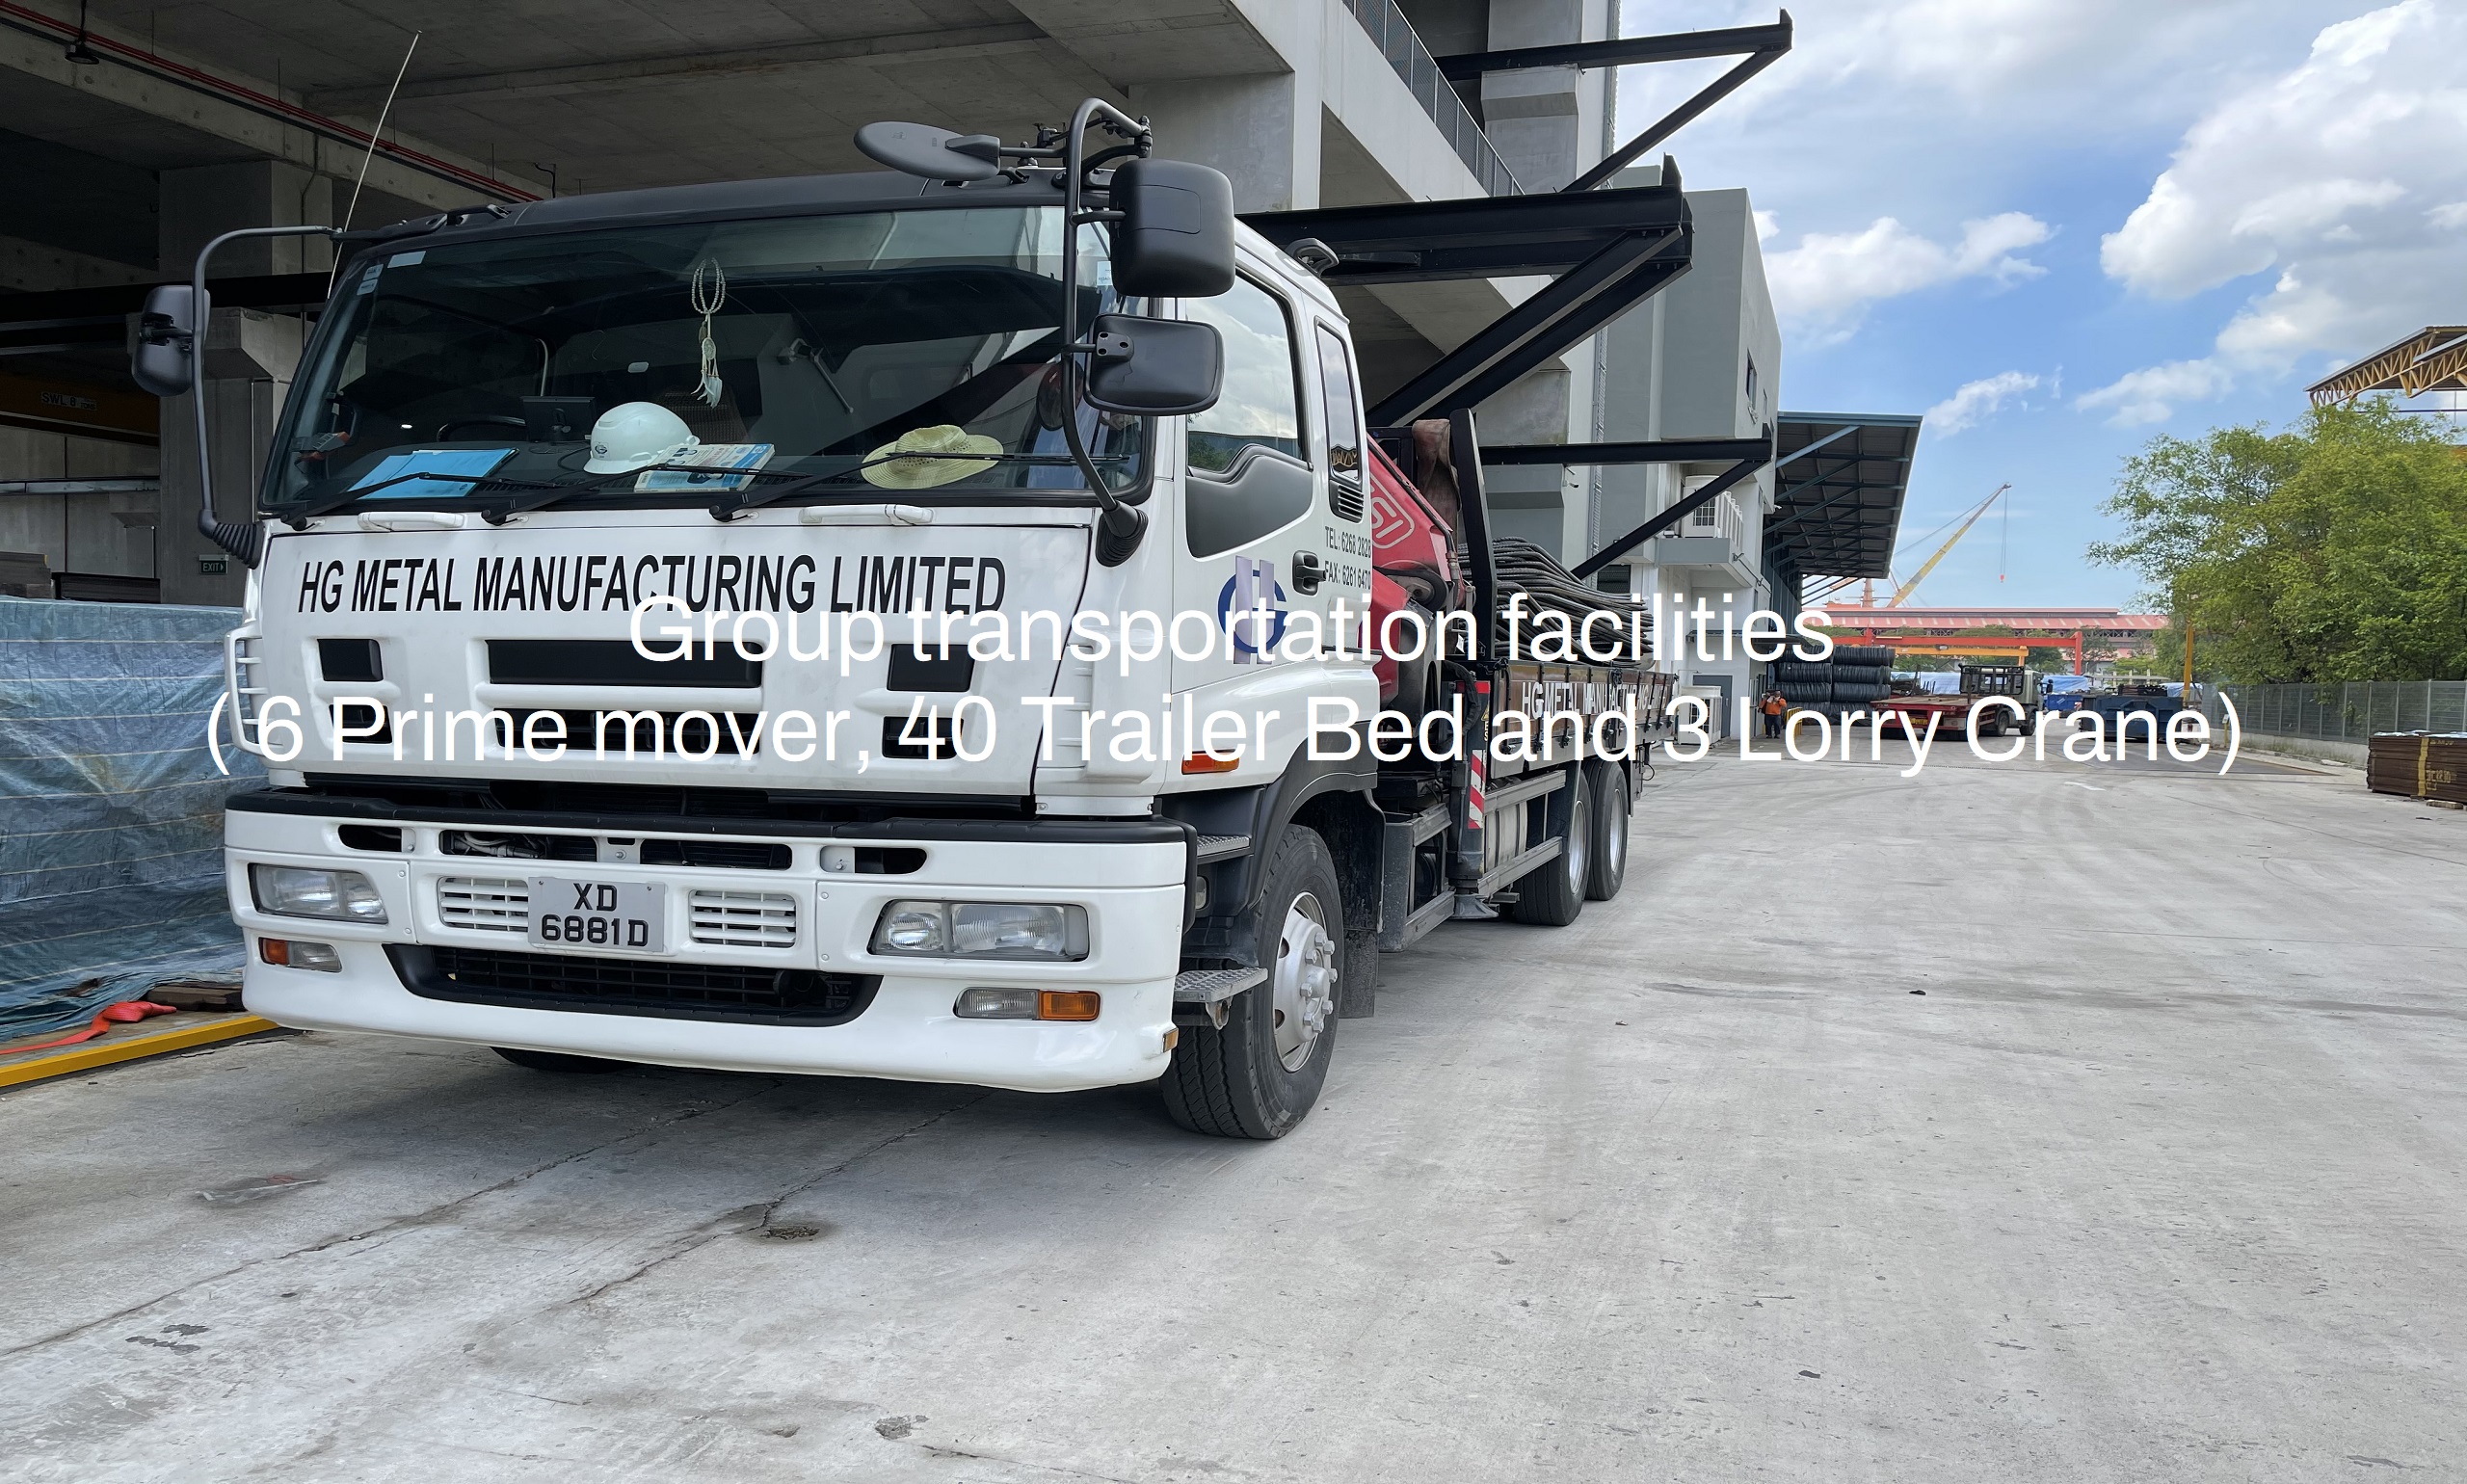 Group transportation facilities ( 6 Prime mover, 40 Trailer Bed and 3 Lorry Crane)